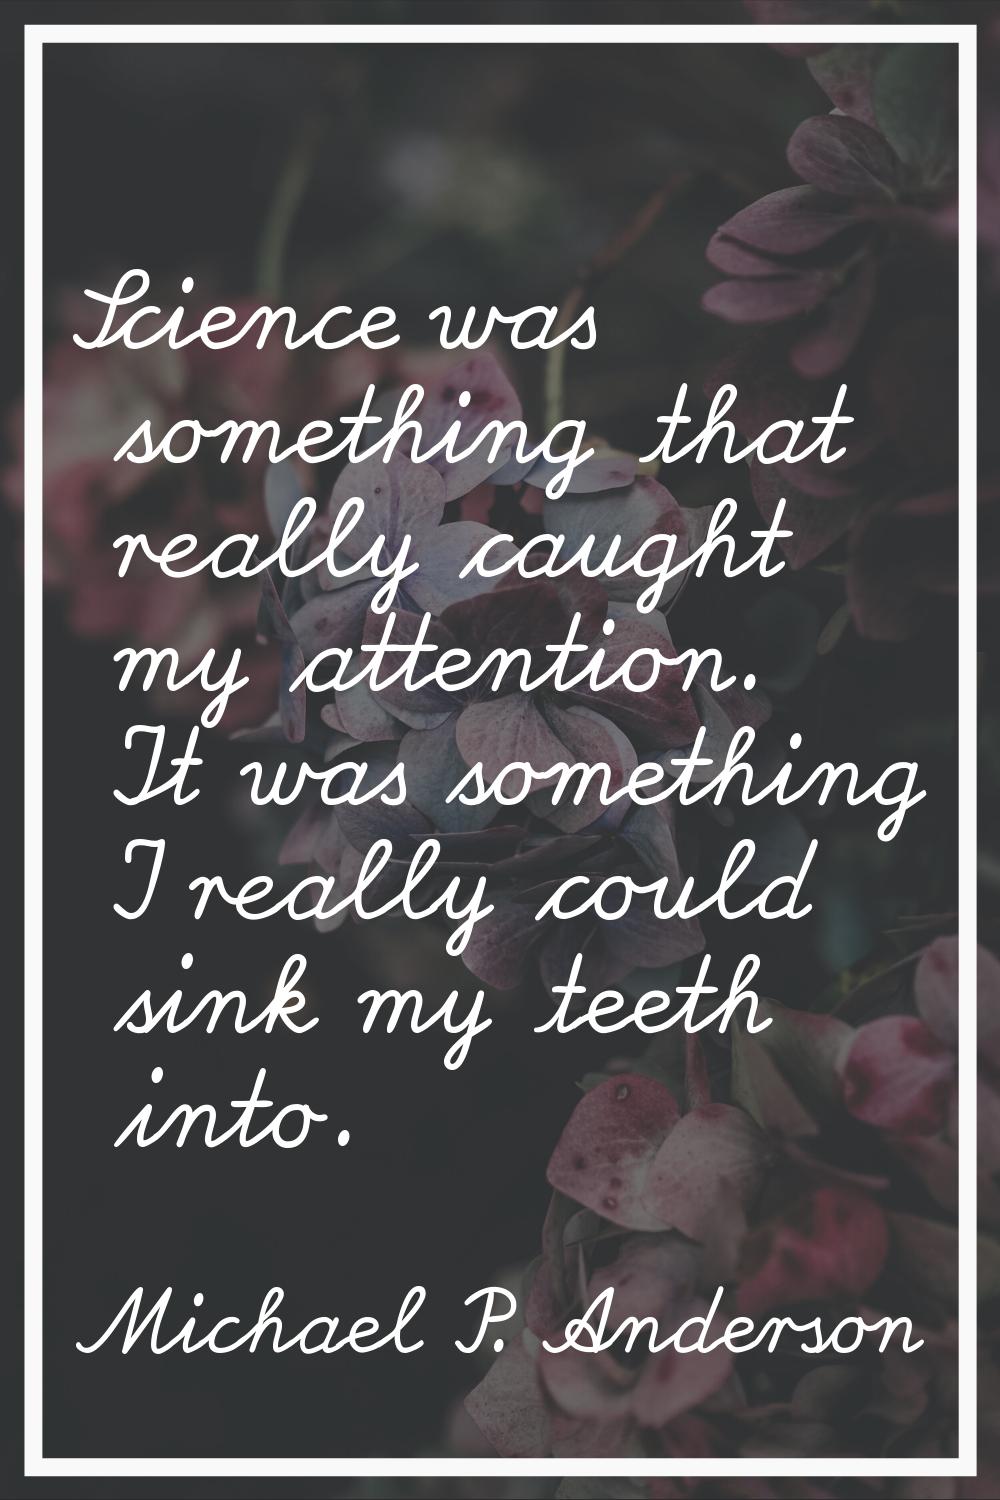 Science was something that really caught my attention. It was something I really could sink my teet